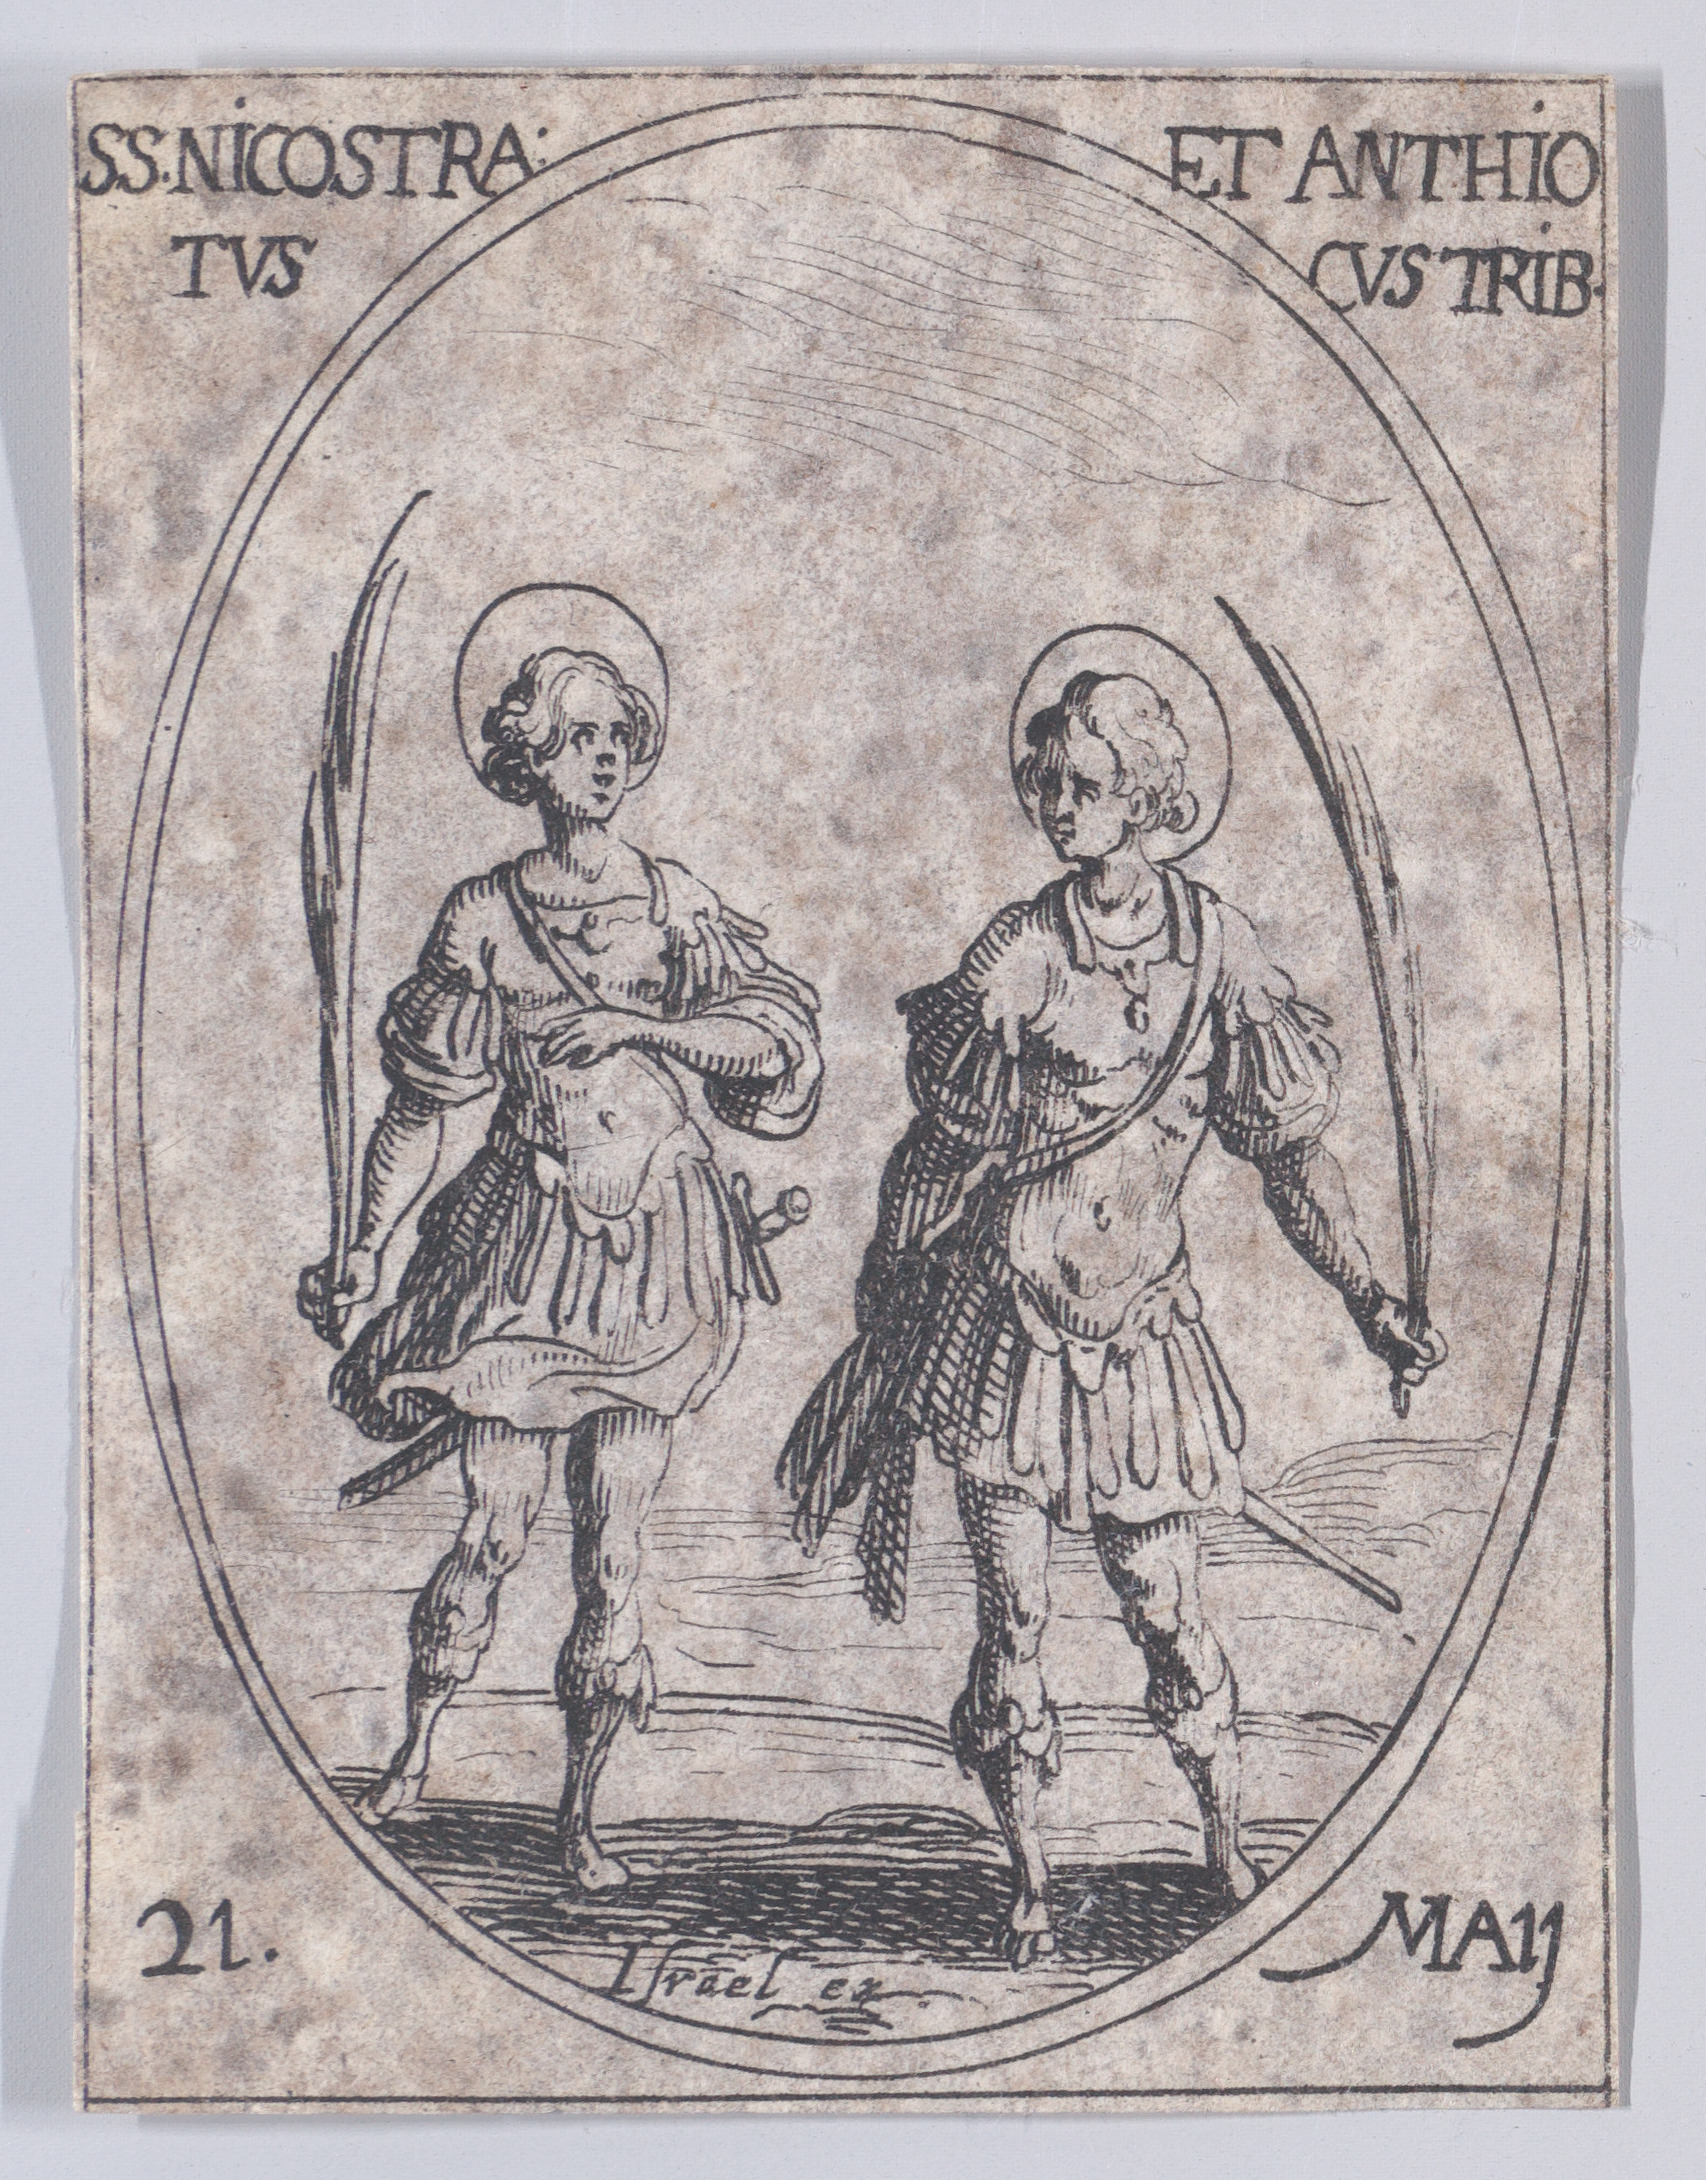 S. Nicotras et S. Antioches, tribuns (St. Nicostratus and St. Antiochus, Tribunes), May 21st, from Les Images De Tous Les Saincts et Saintes de L'Année (Images of All of the Saints and Religious Events of the Year), Jacques Callot (French, Nancy 1592–1635 Nancy), Etching; second state of two (Lieure)